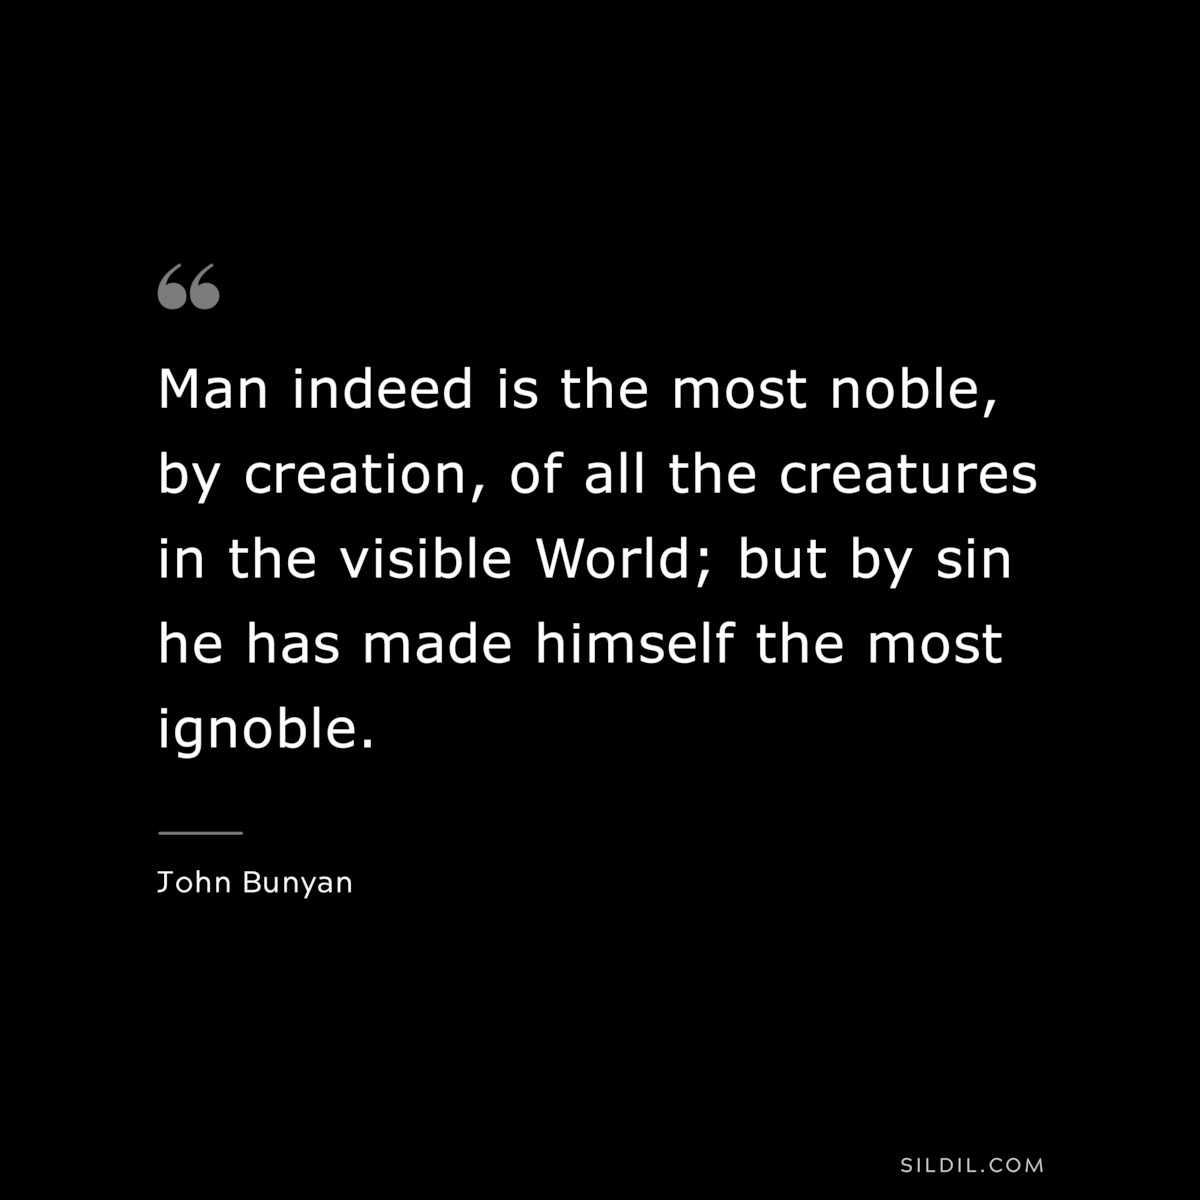 Man indeed is the most noble, by creation, of all the creatures in the visible World; but by sin he has made himself the most ignoble. ― John Bunyan